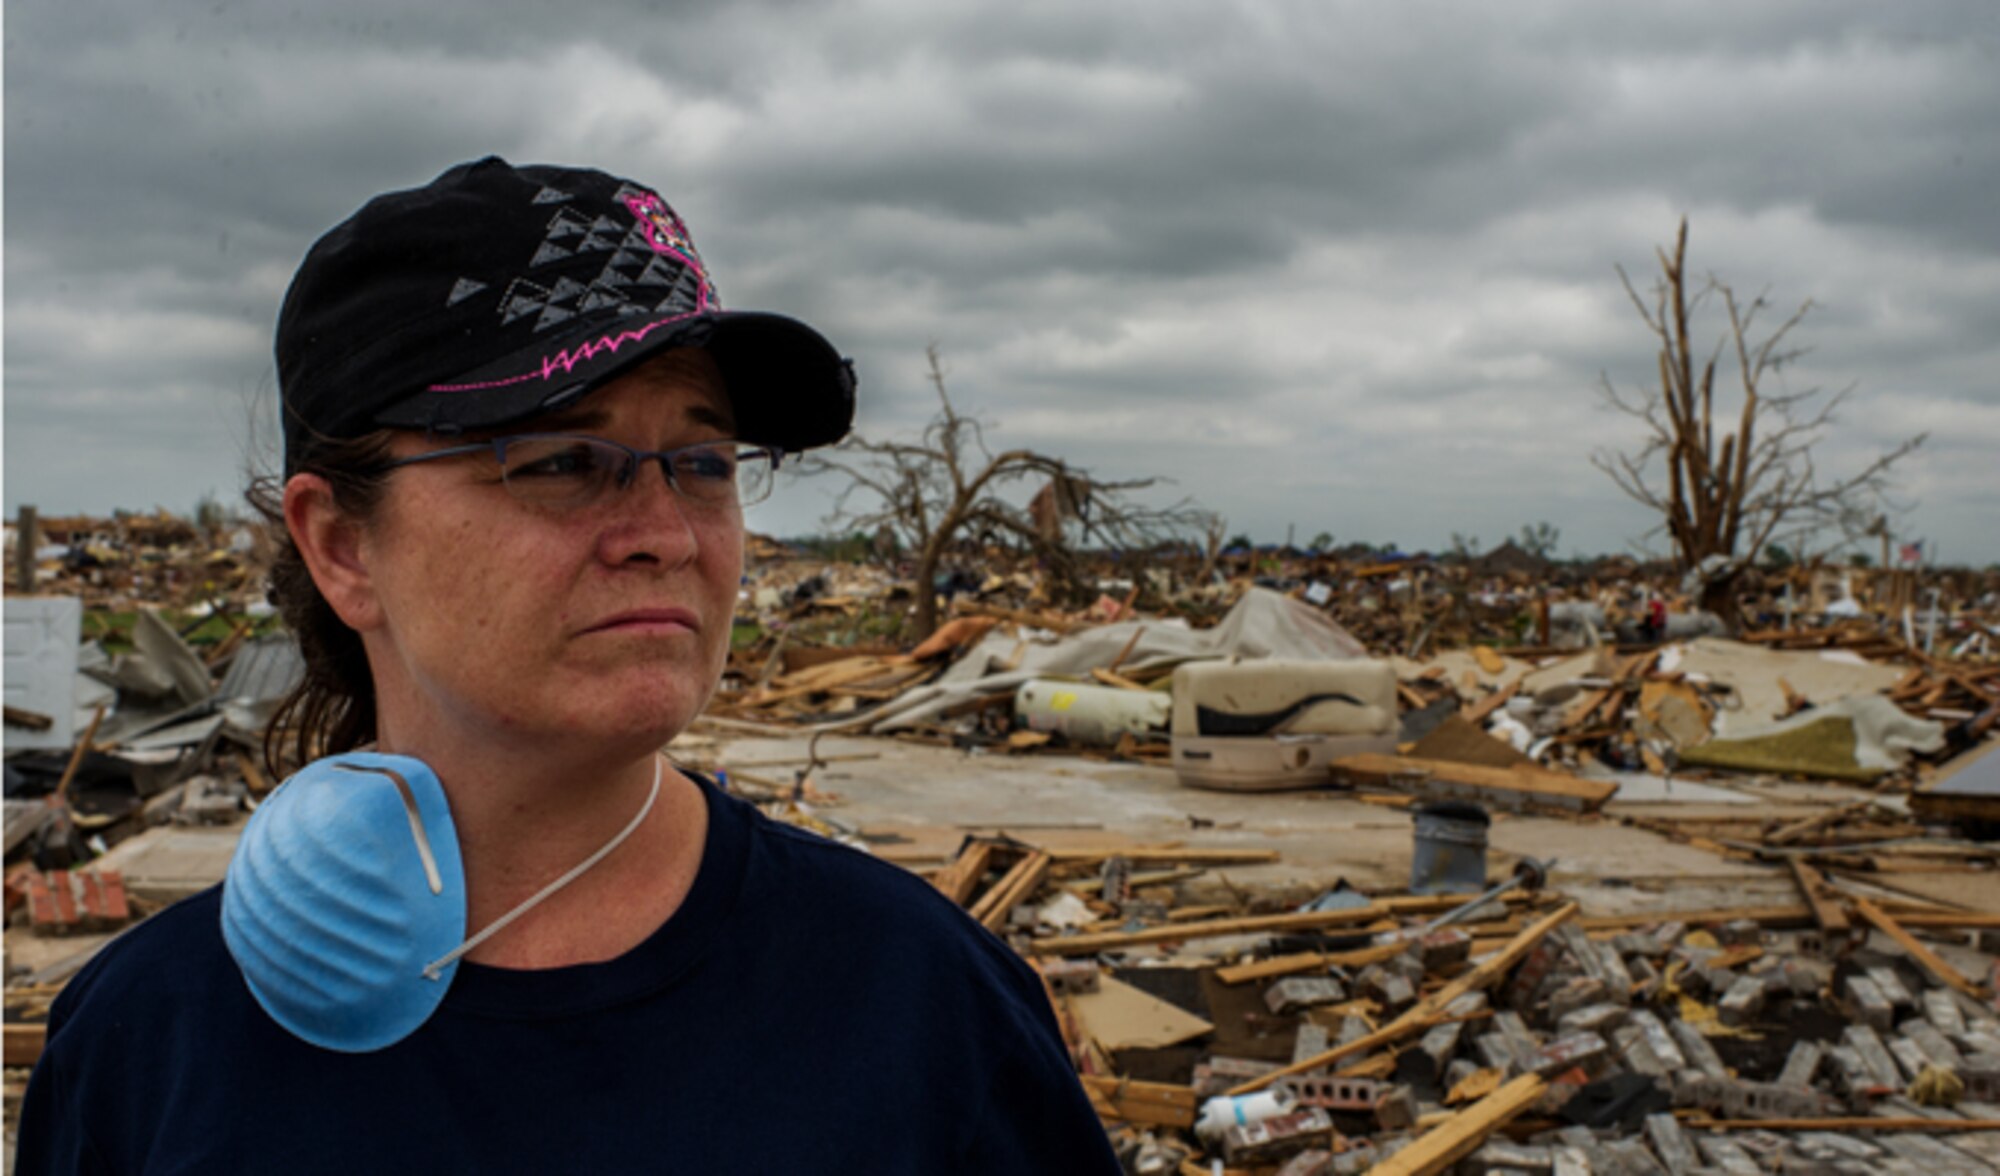 From the remnants of her former home, May 27, 2013, Tech. Sgt. Rhonda Stockstill surveys the devastation left in the wake of an EF-5 tornado that ripped through her neighborhood of Moore, Okla., on May 20. Soon after the storm passed, Stockstill rushed to provide aid to students and faculty injured and trapped in nearby Briarwood Elementary School. Stockstill is a surgical technician with the 72nd Medical Group at Tinker Air Force Base, Okla. (U.S. Air Force photo/Staff Sgt. Jonathan Snyder)